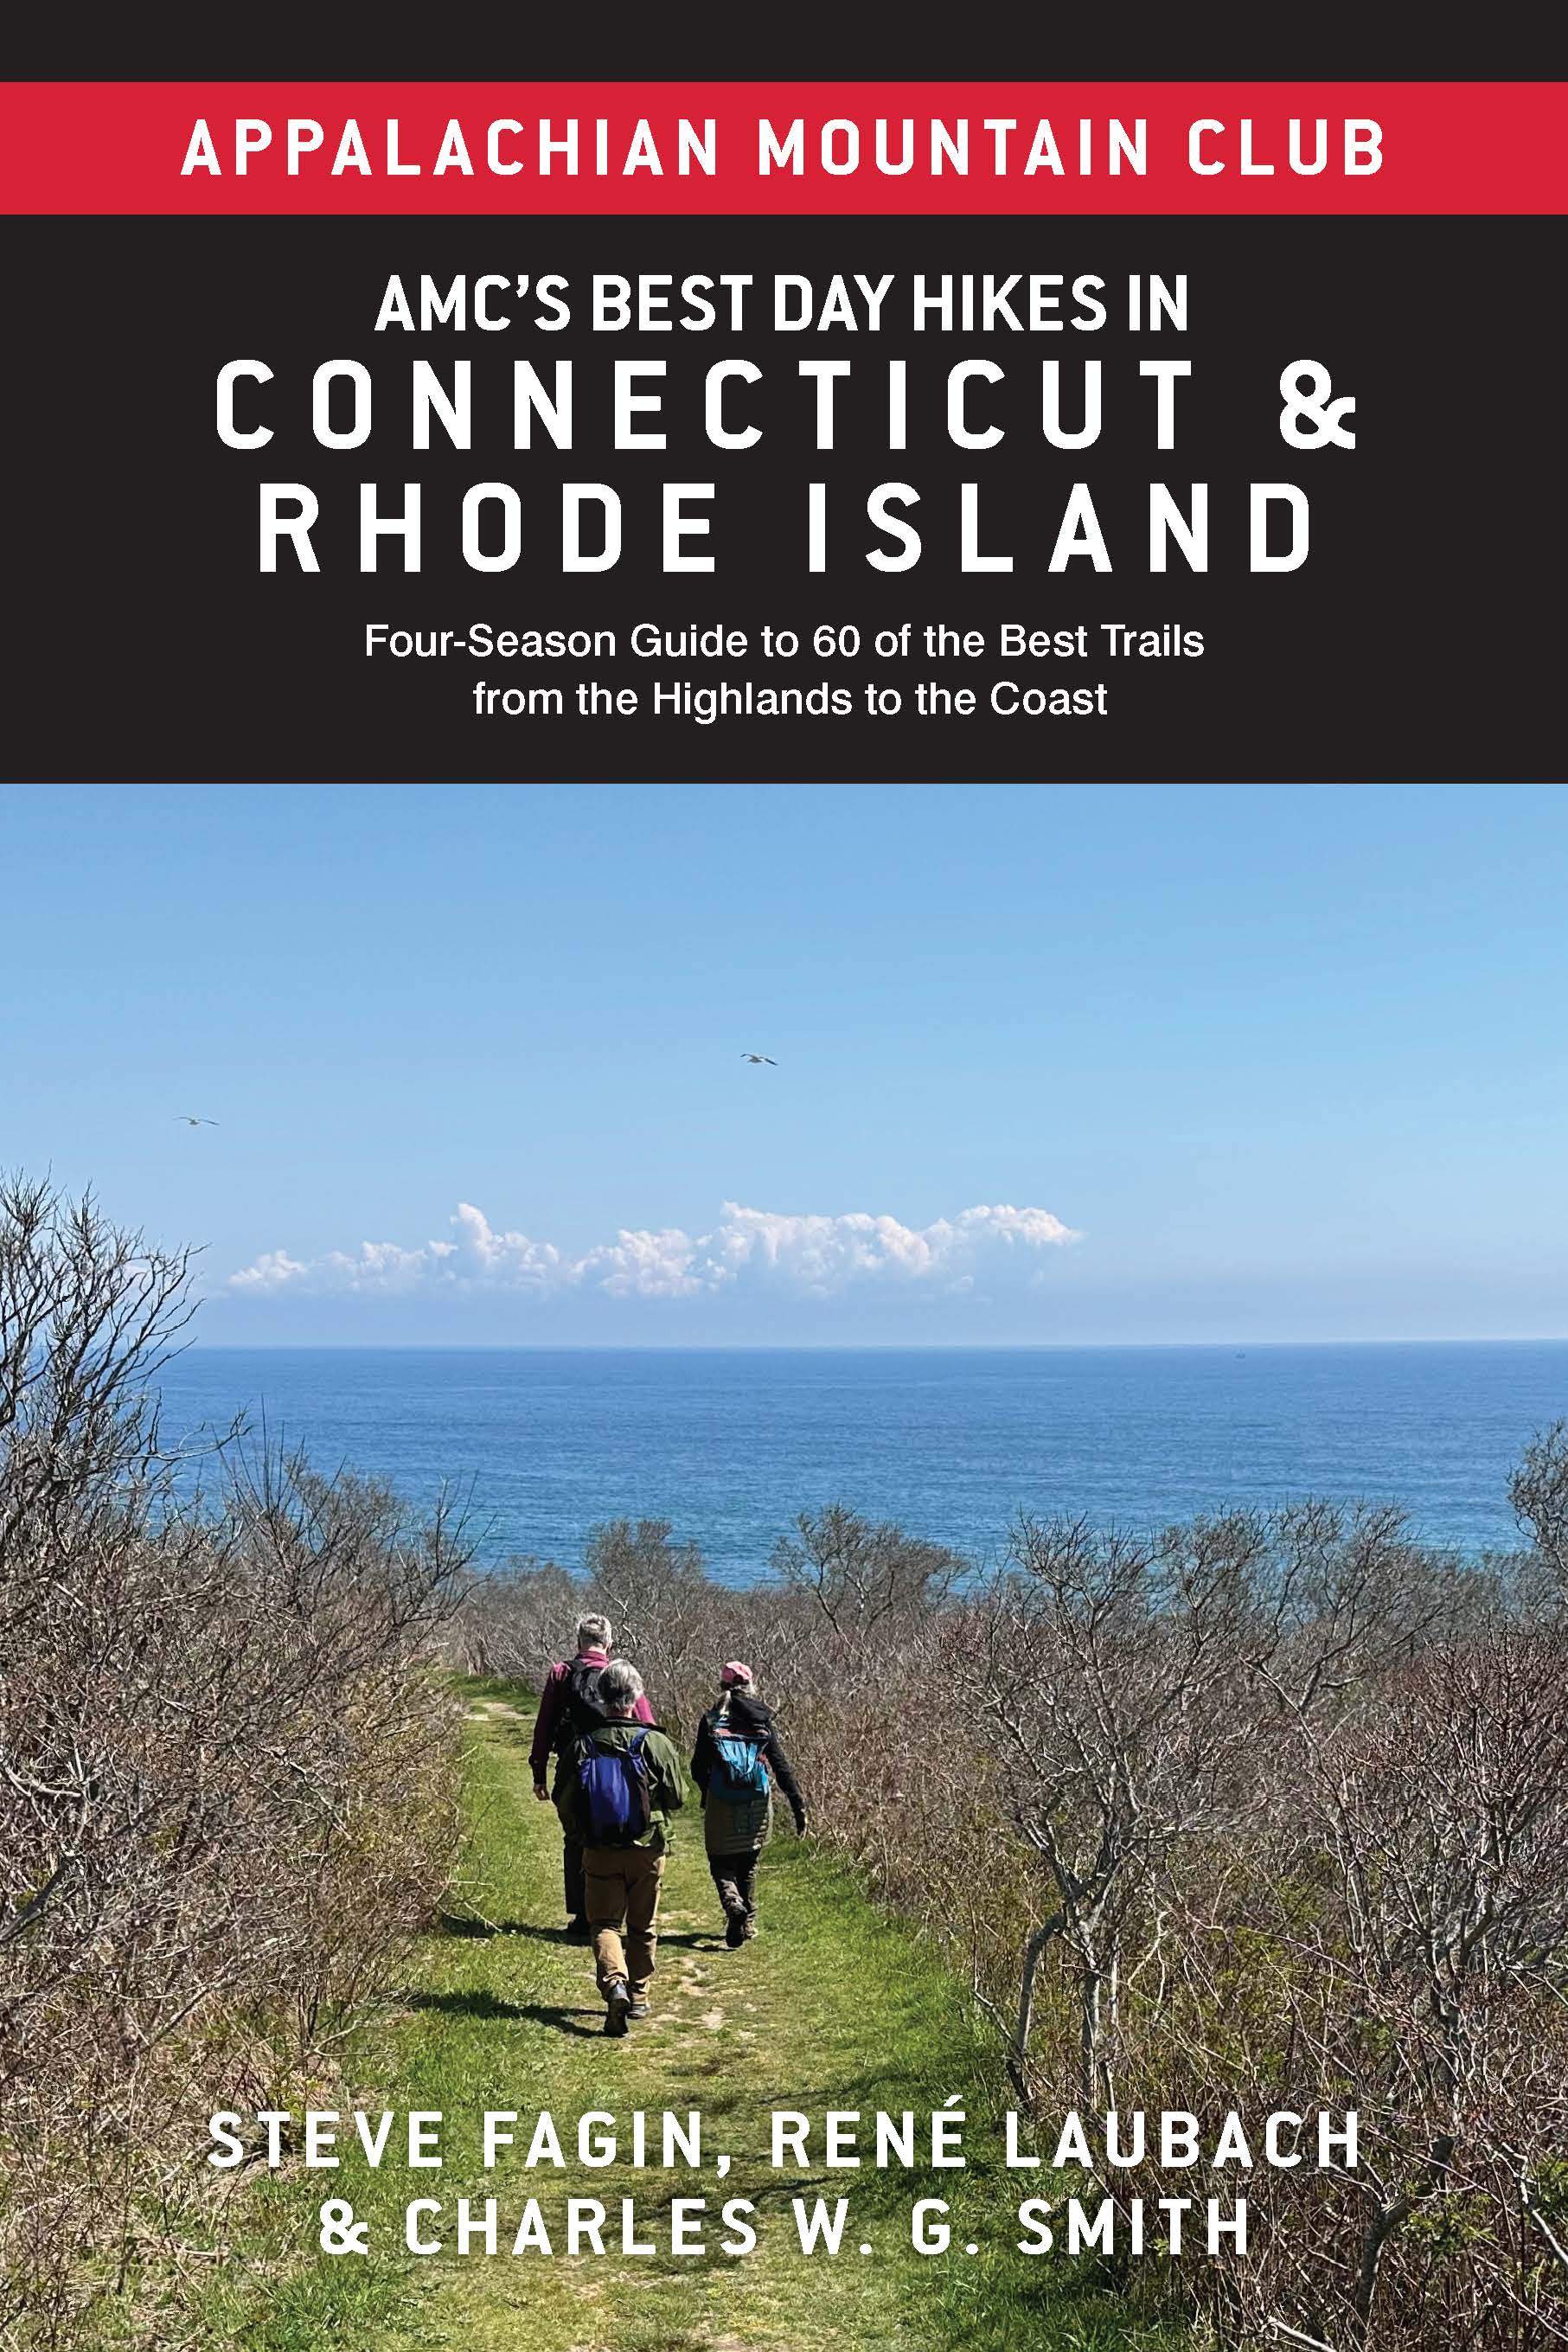 AMC's Best Day Hikes in Connecticut and Rhode Island